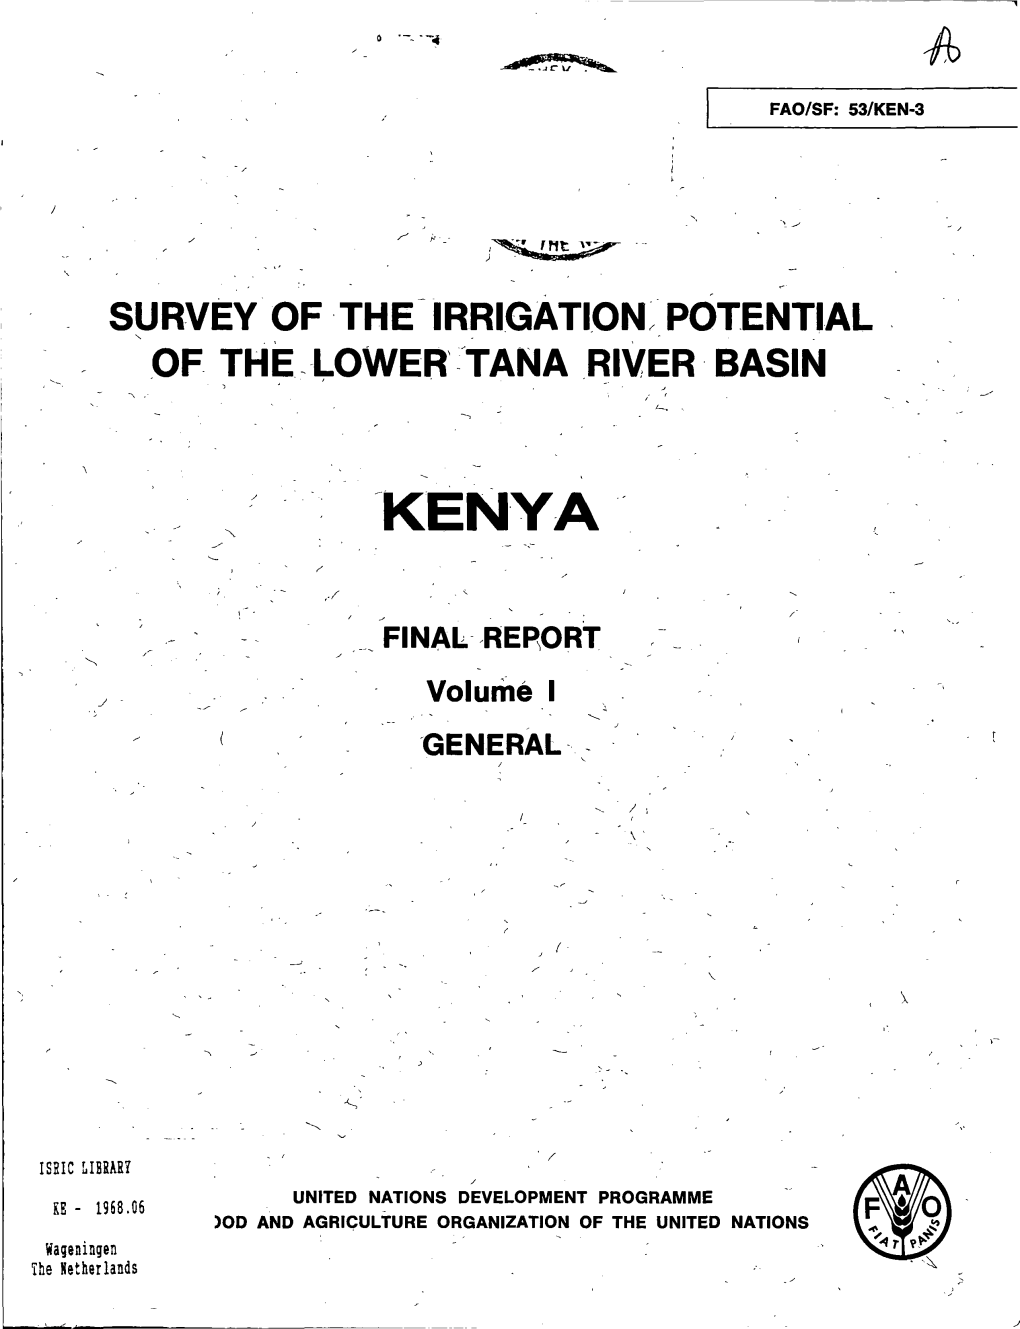 Survey of the Irrigation Potential of the Lower Tana River Basin